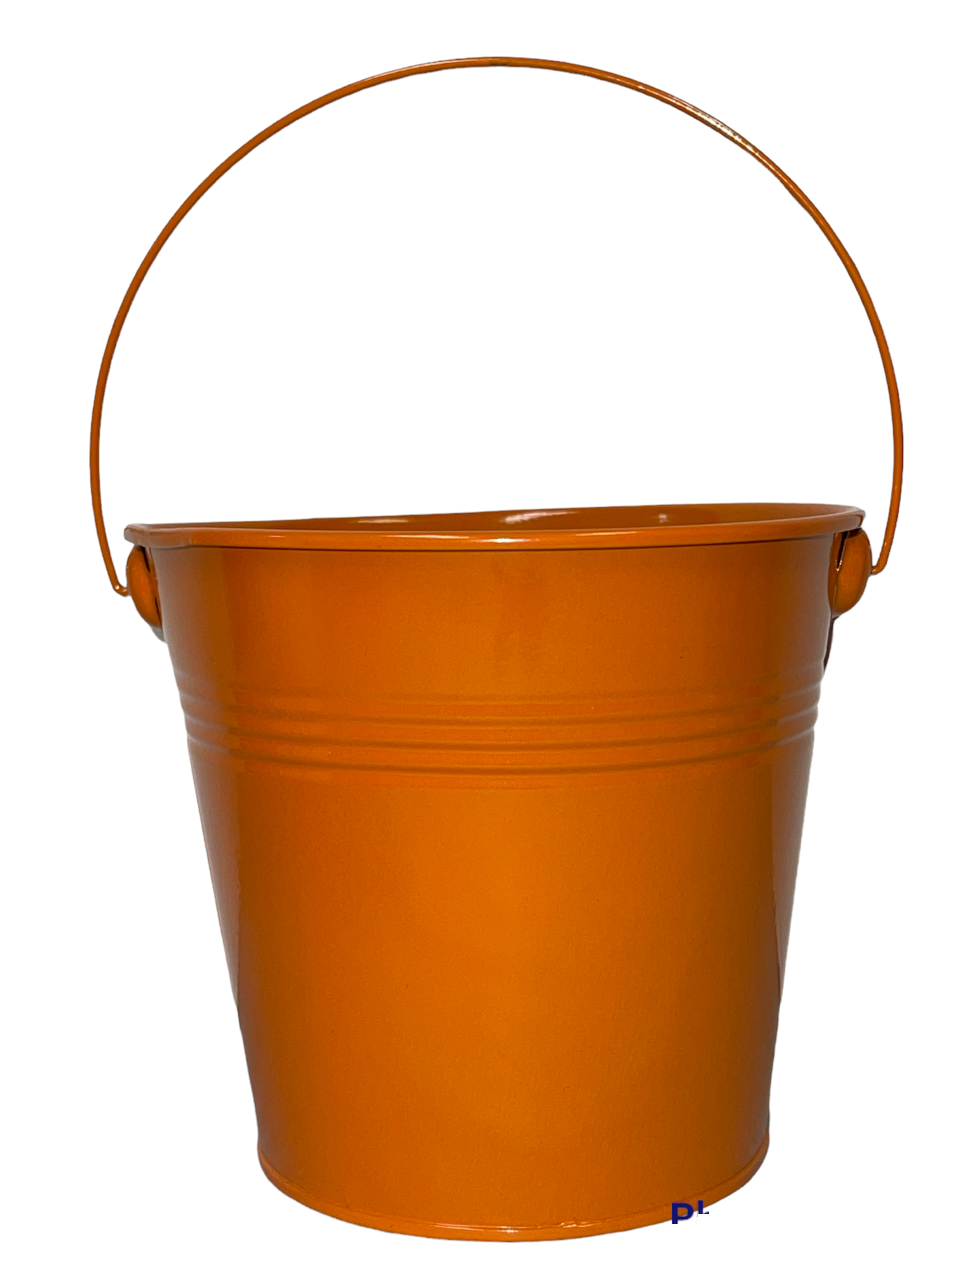 Colored Mini Metal Buckets - 3-Pack Colorful Tin Pails with Handles,  Small-Sized for The Beach, Party Favors, Easter, Candy, or Garden;